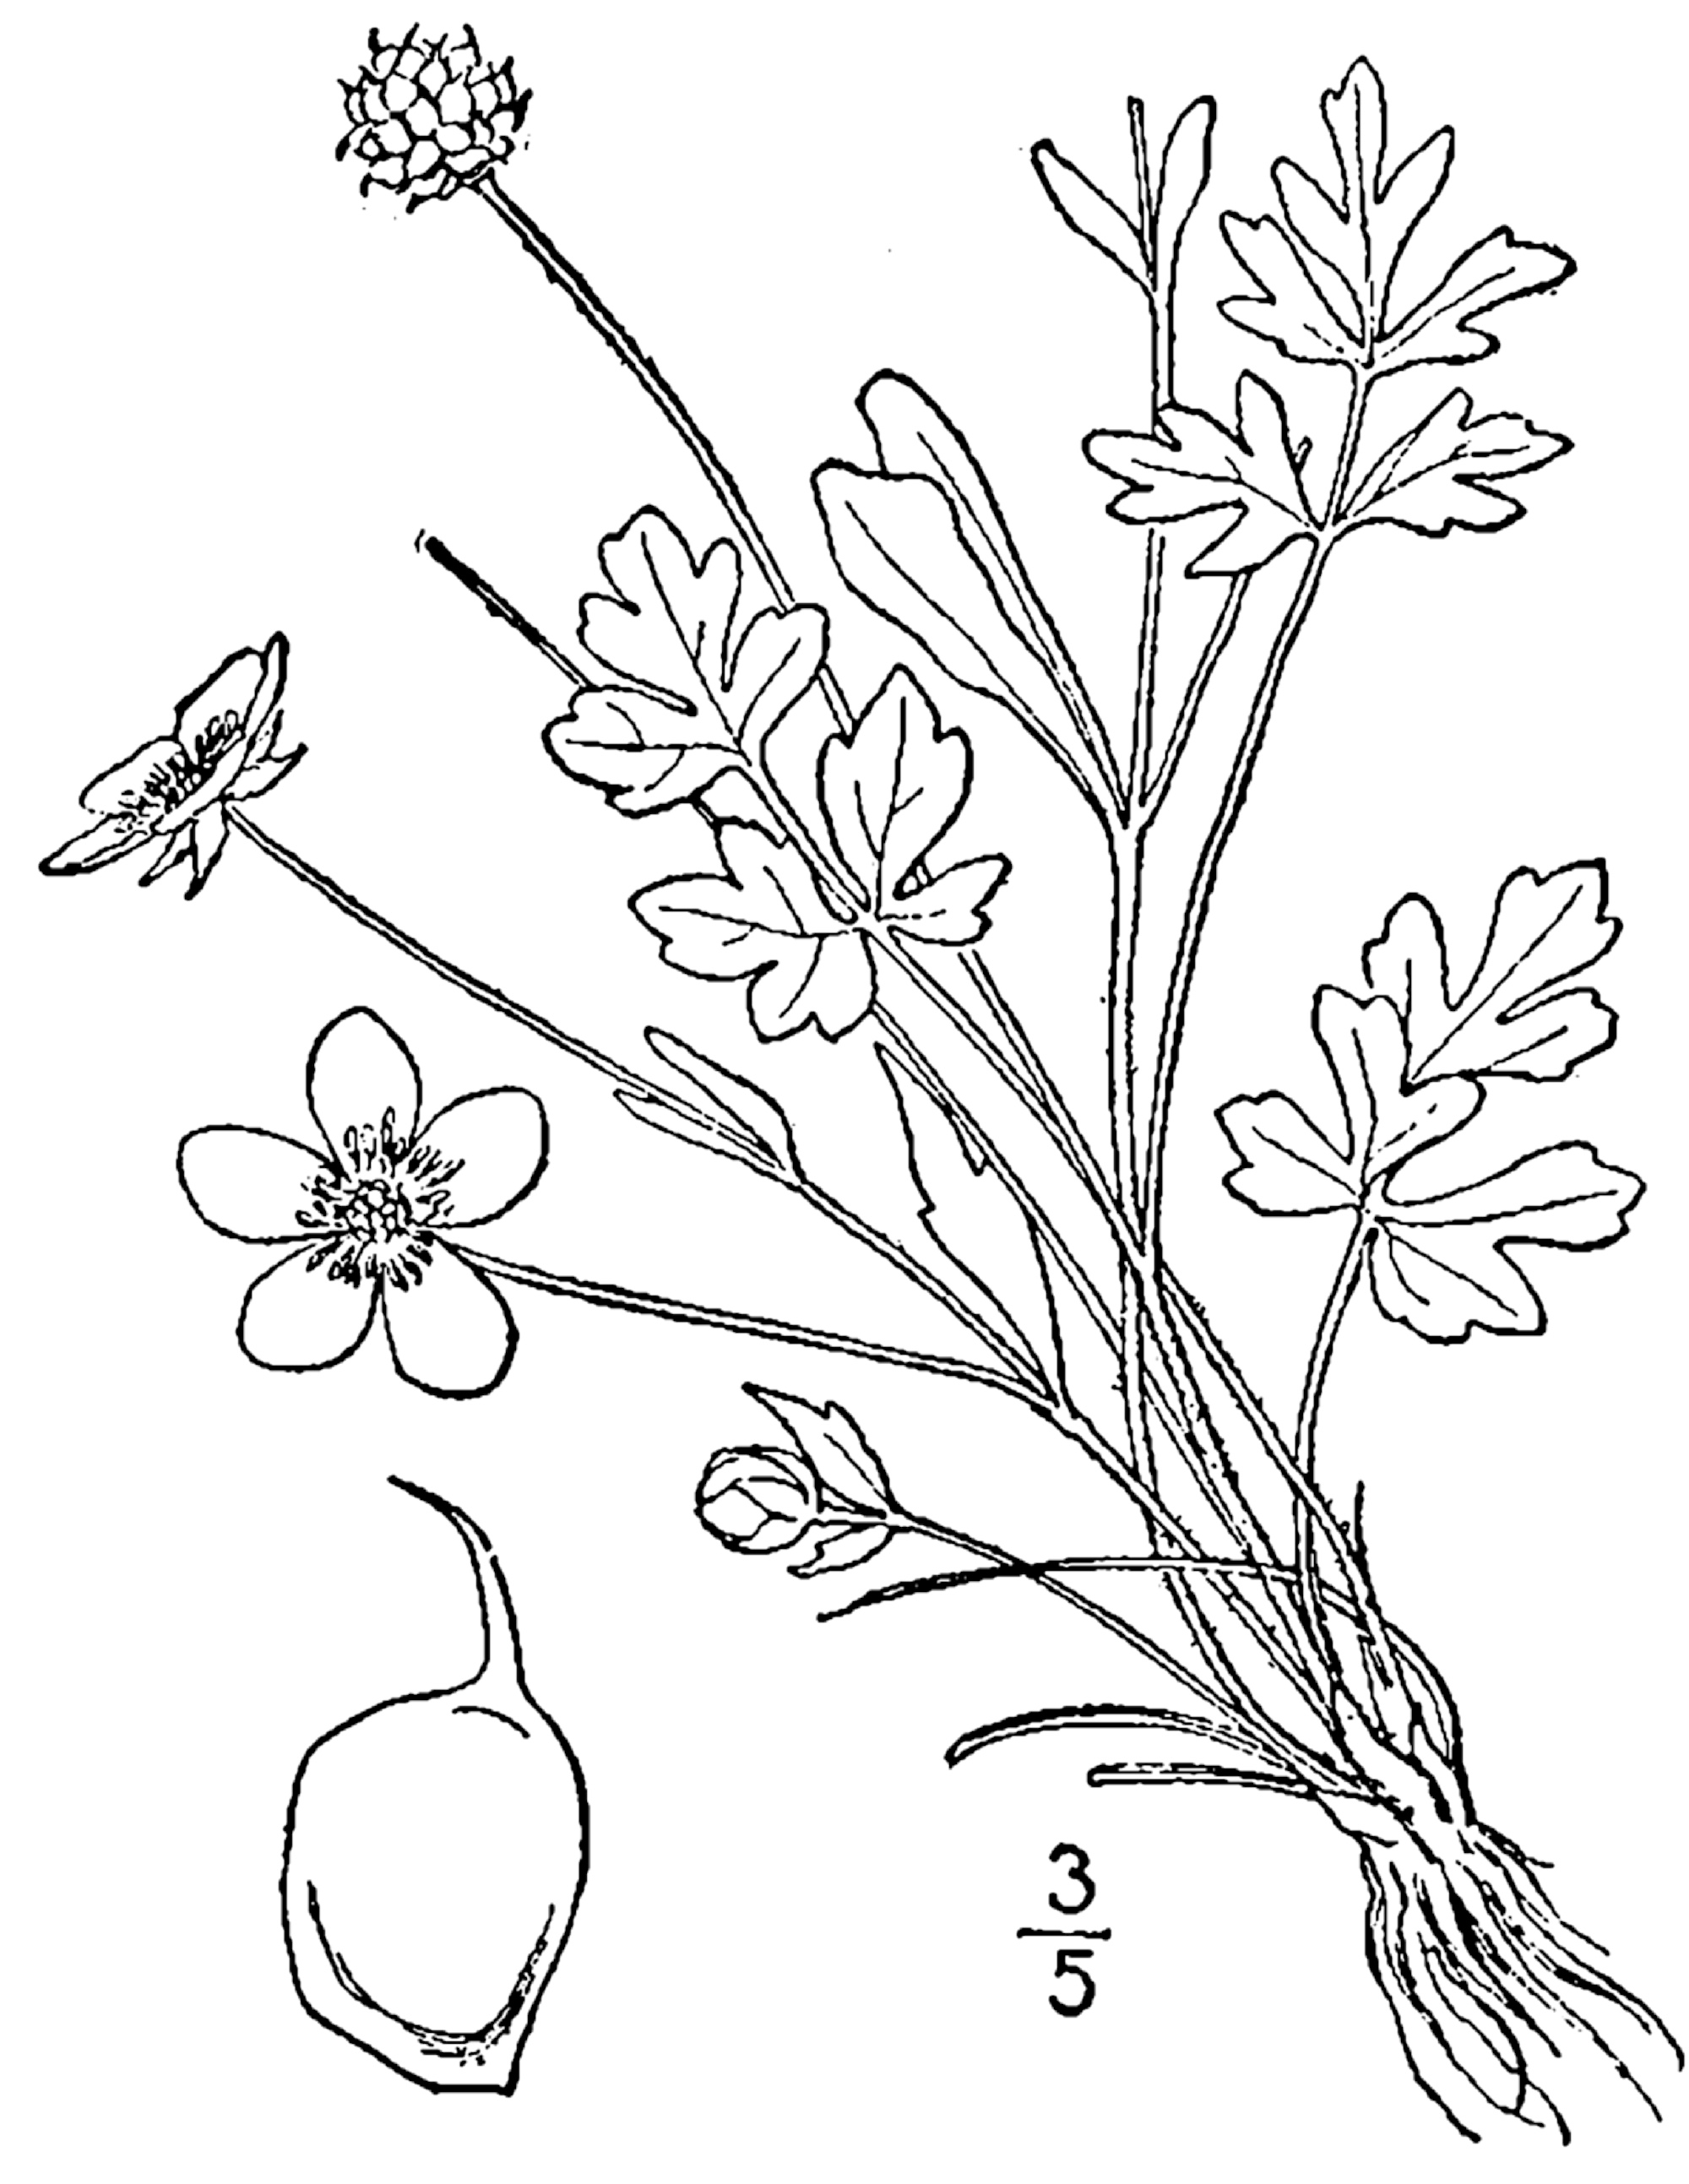 1913 illustration of Early Buttercup.